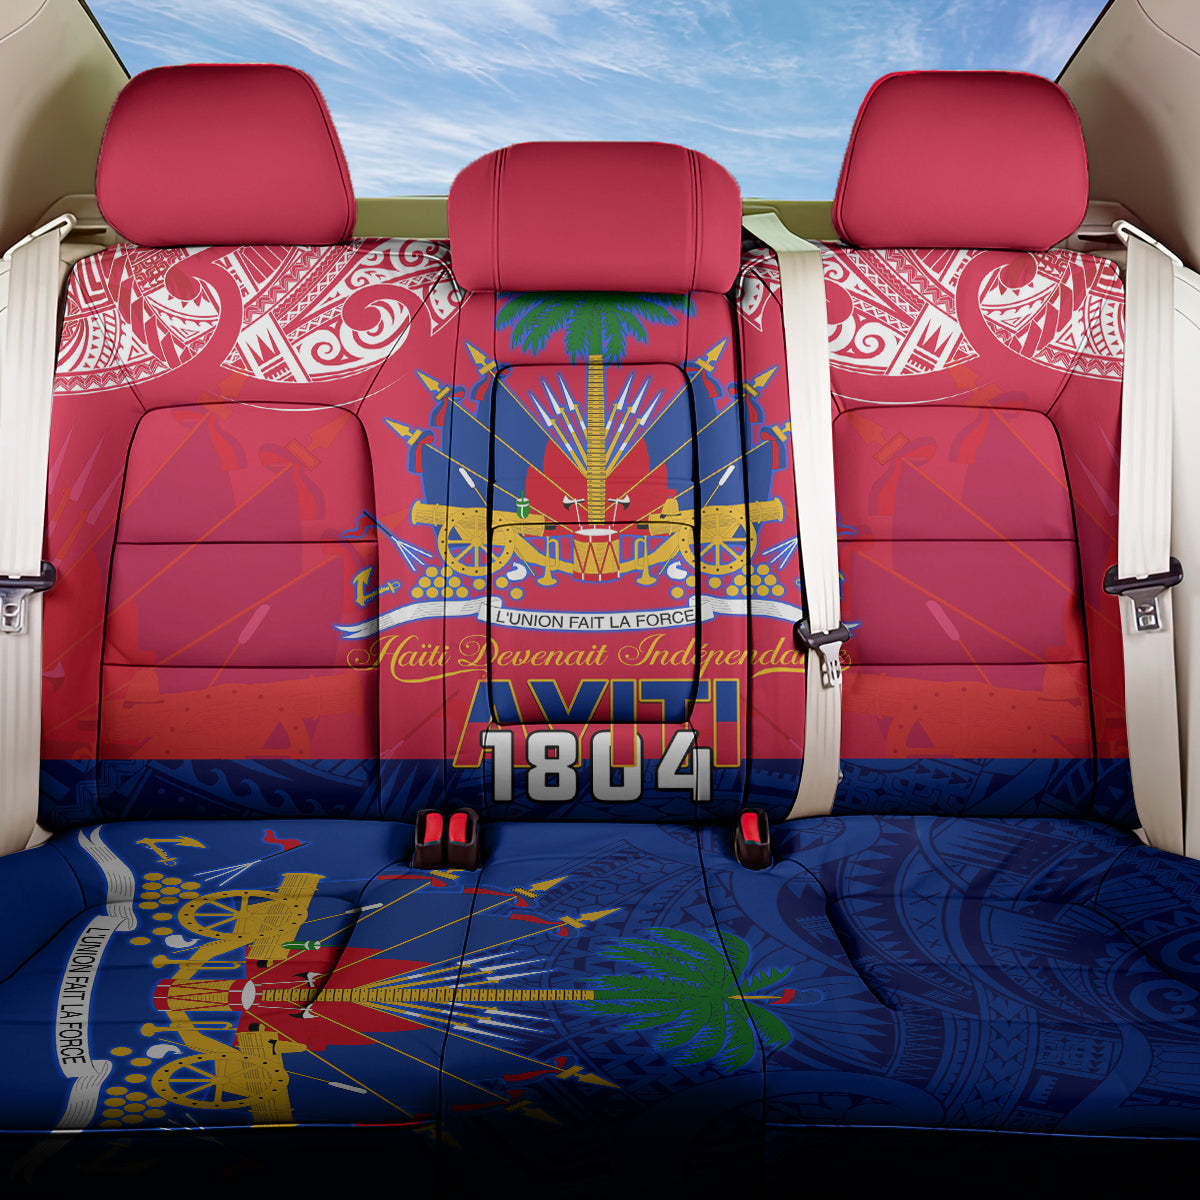 Haiti Independence Day Back Car Seat Cover Libete Egalite Fratenite Ayiti 1804 With Polynesian Pattern LT9